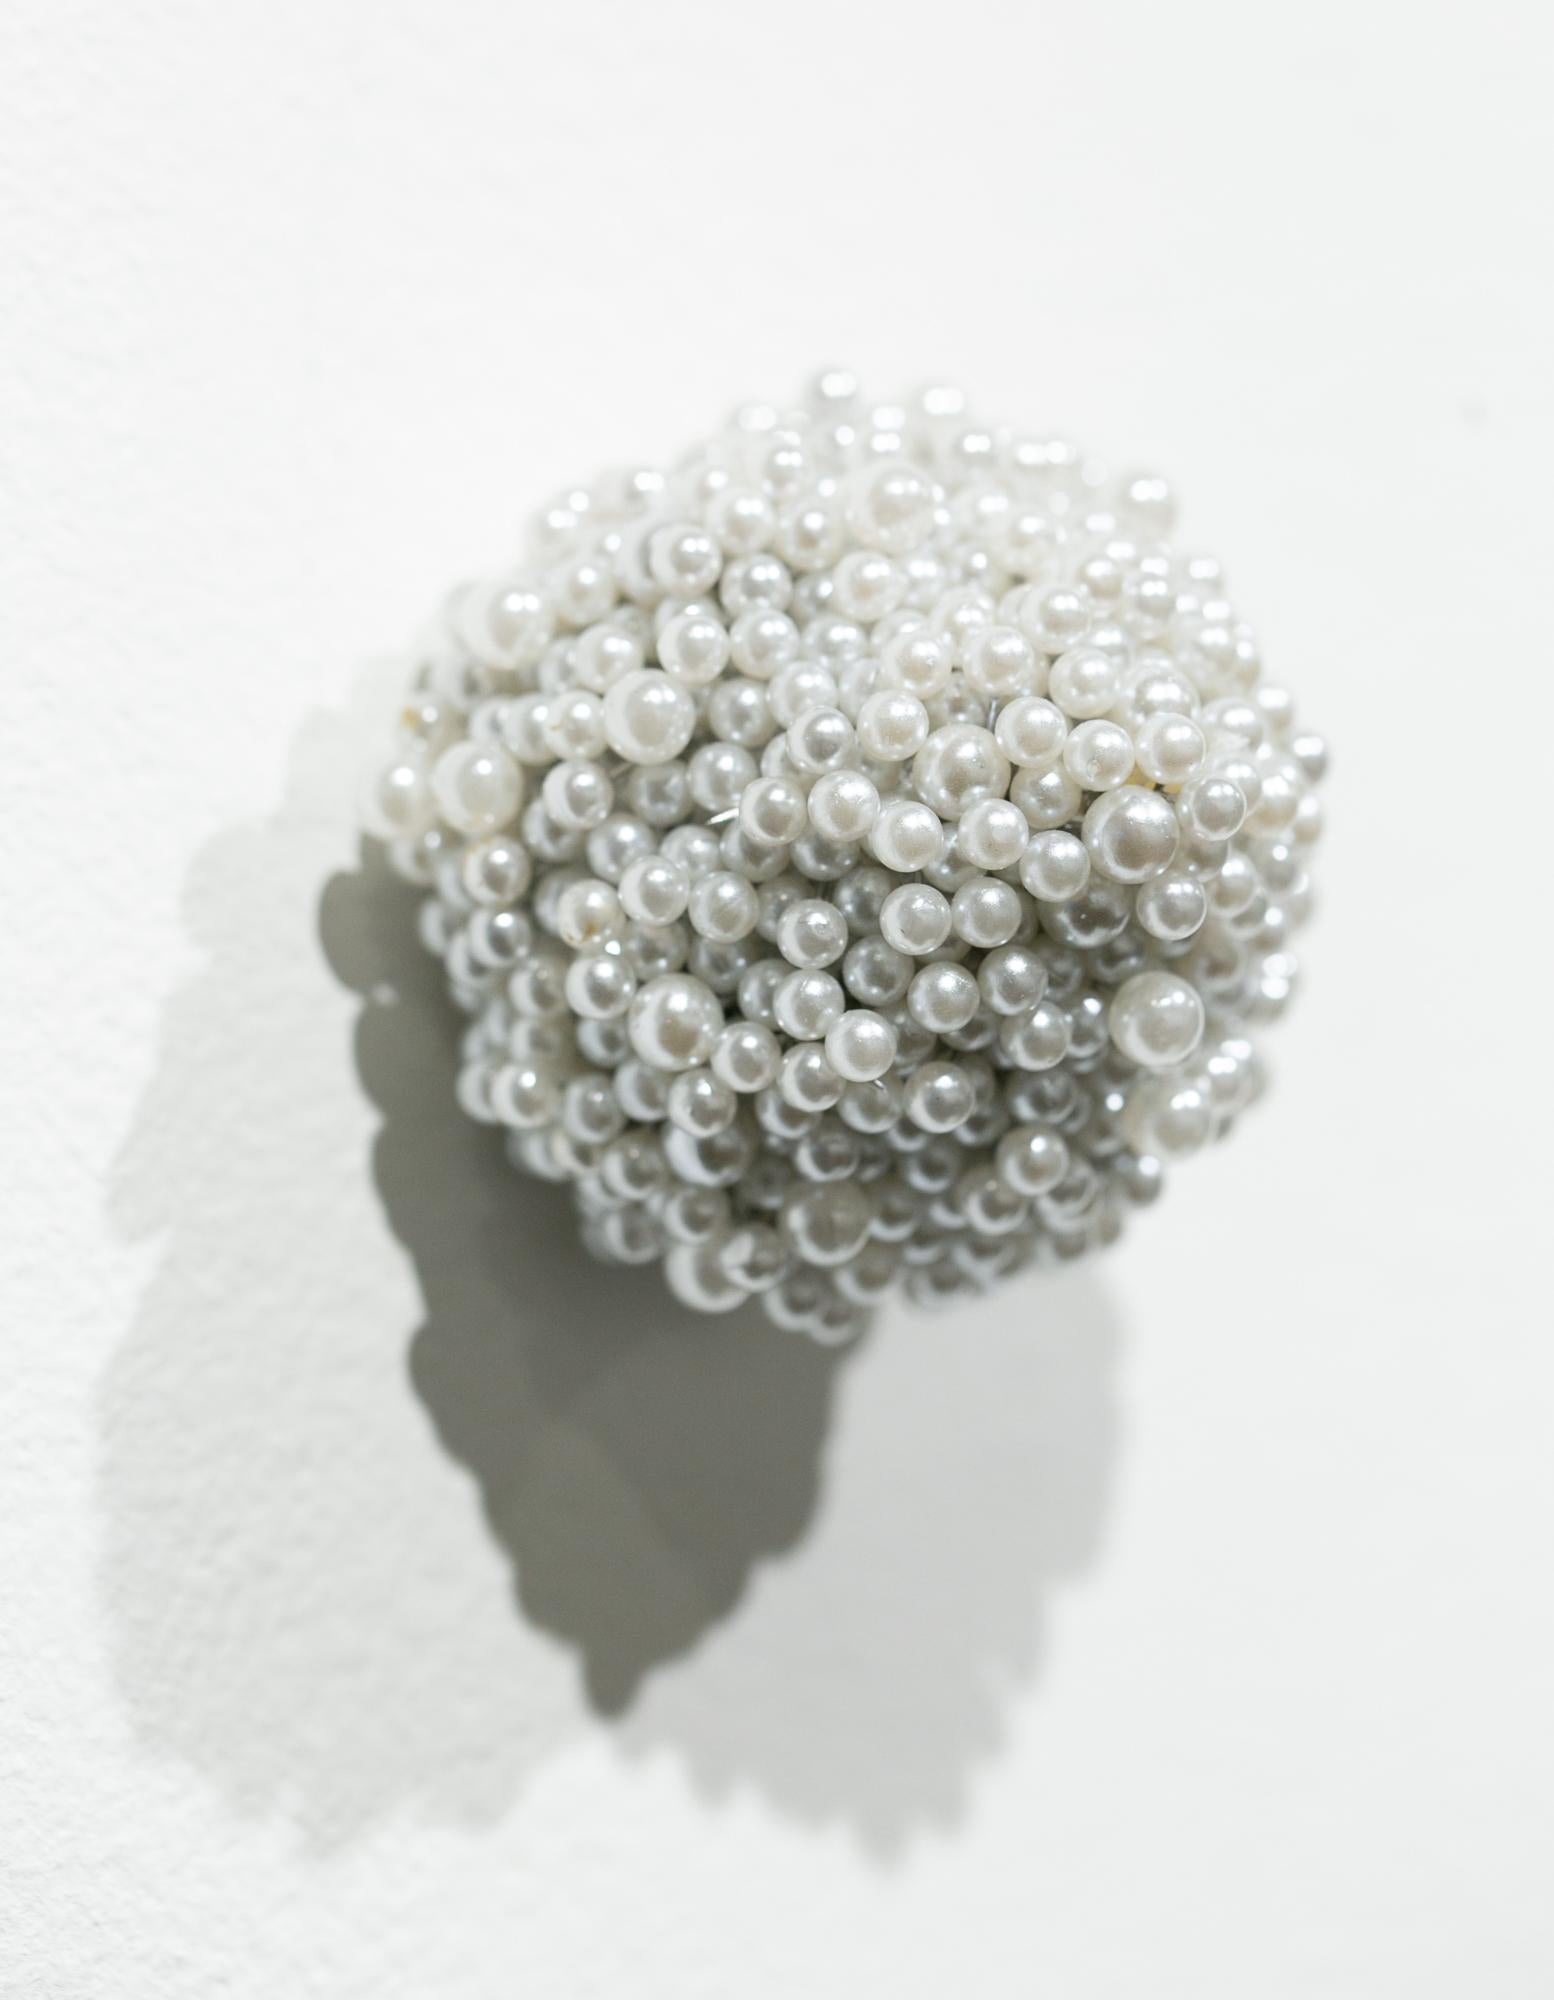 This abstract sculpture titled "Tickler #5" is an original artwork by Angela Ellsworth made of pearl corsage pins, brass, and industrial foam. This piece measures 2.5”h x 2.25”w x 2”d.

Angela Ellsworth is a multidisciplinary artist traversing